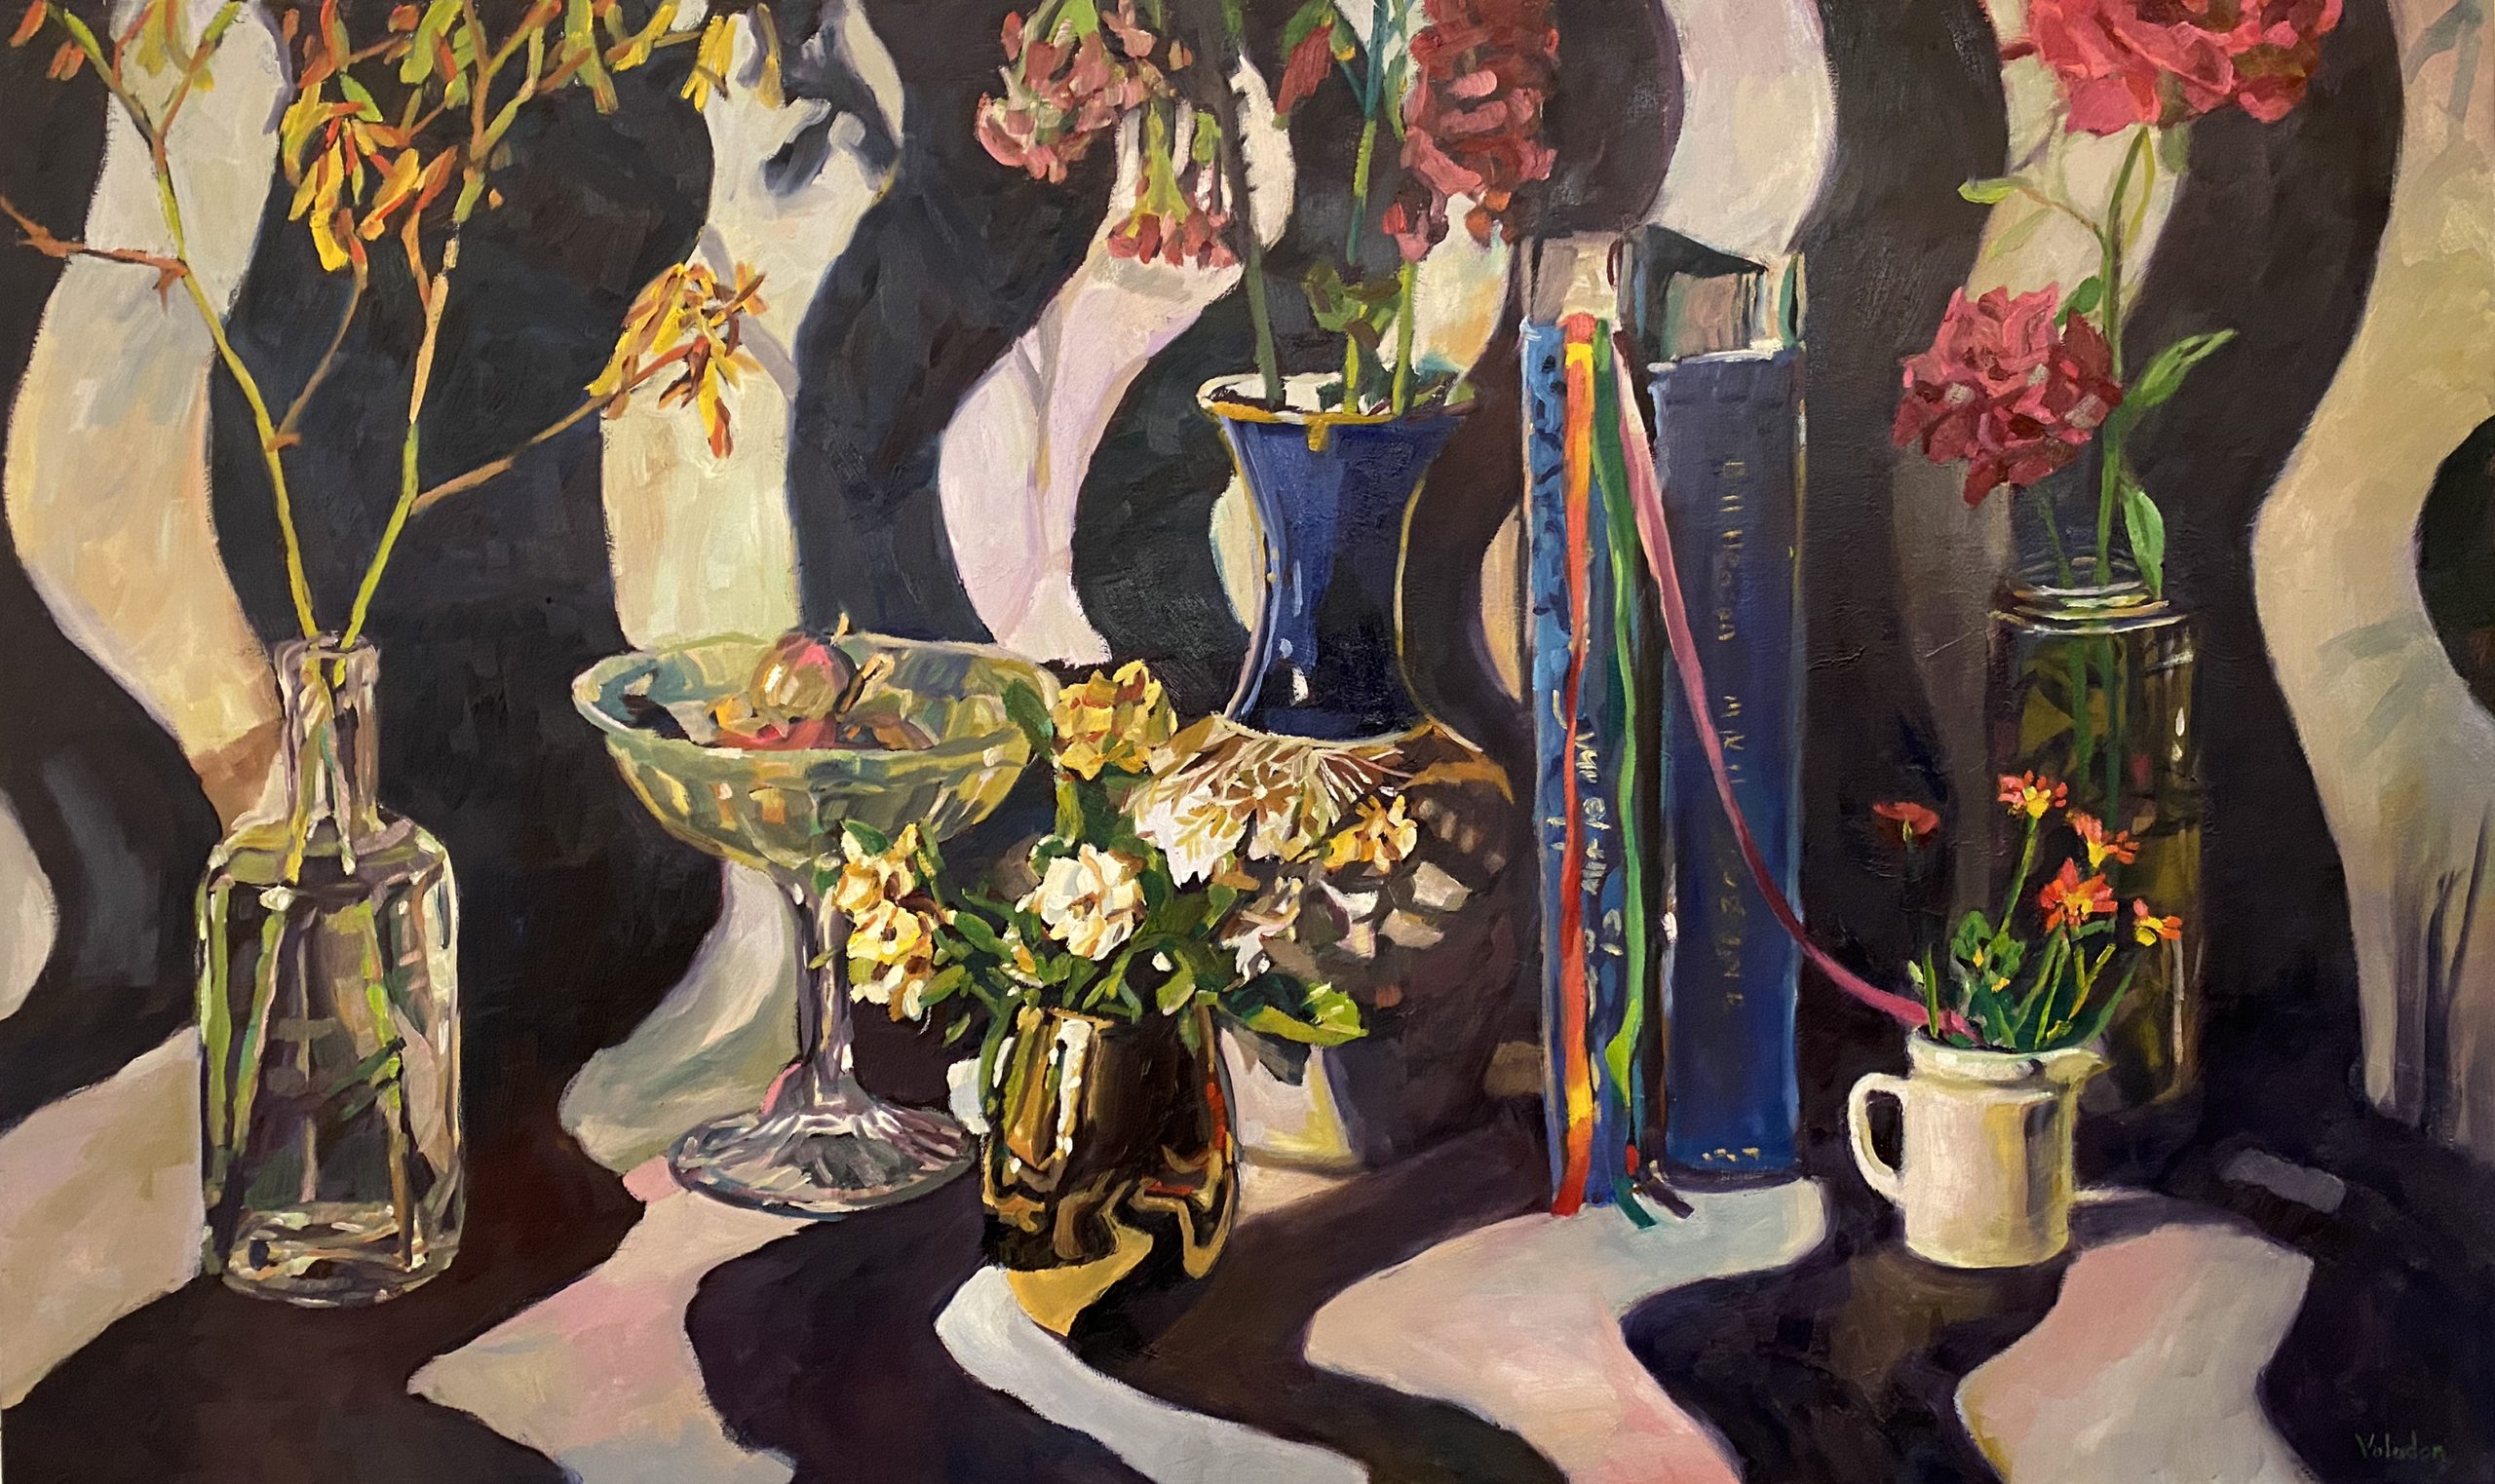 Rosemary Valadon 'On the Table' oil on canvas 91 x 152 cm